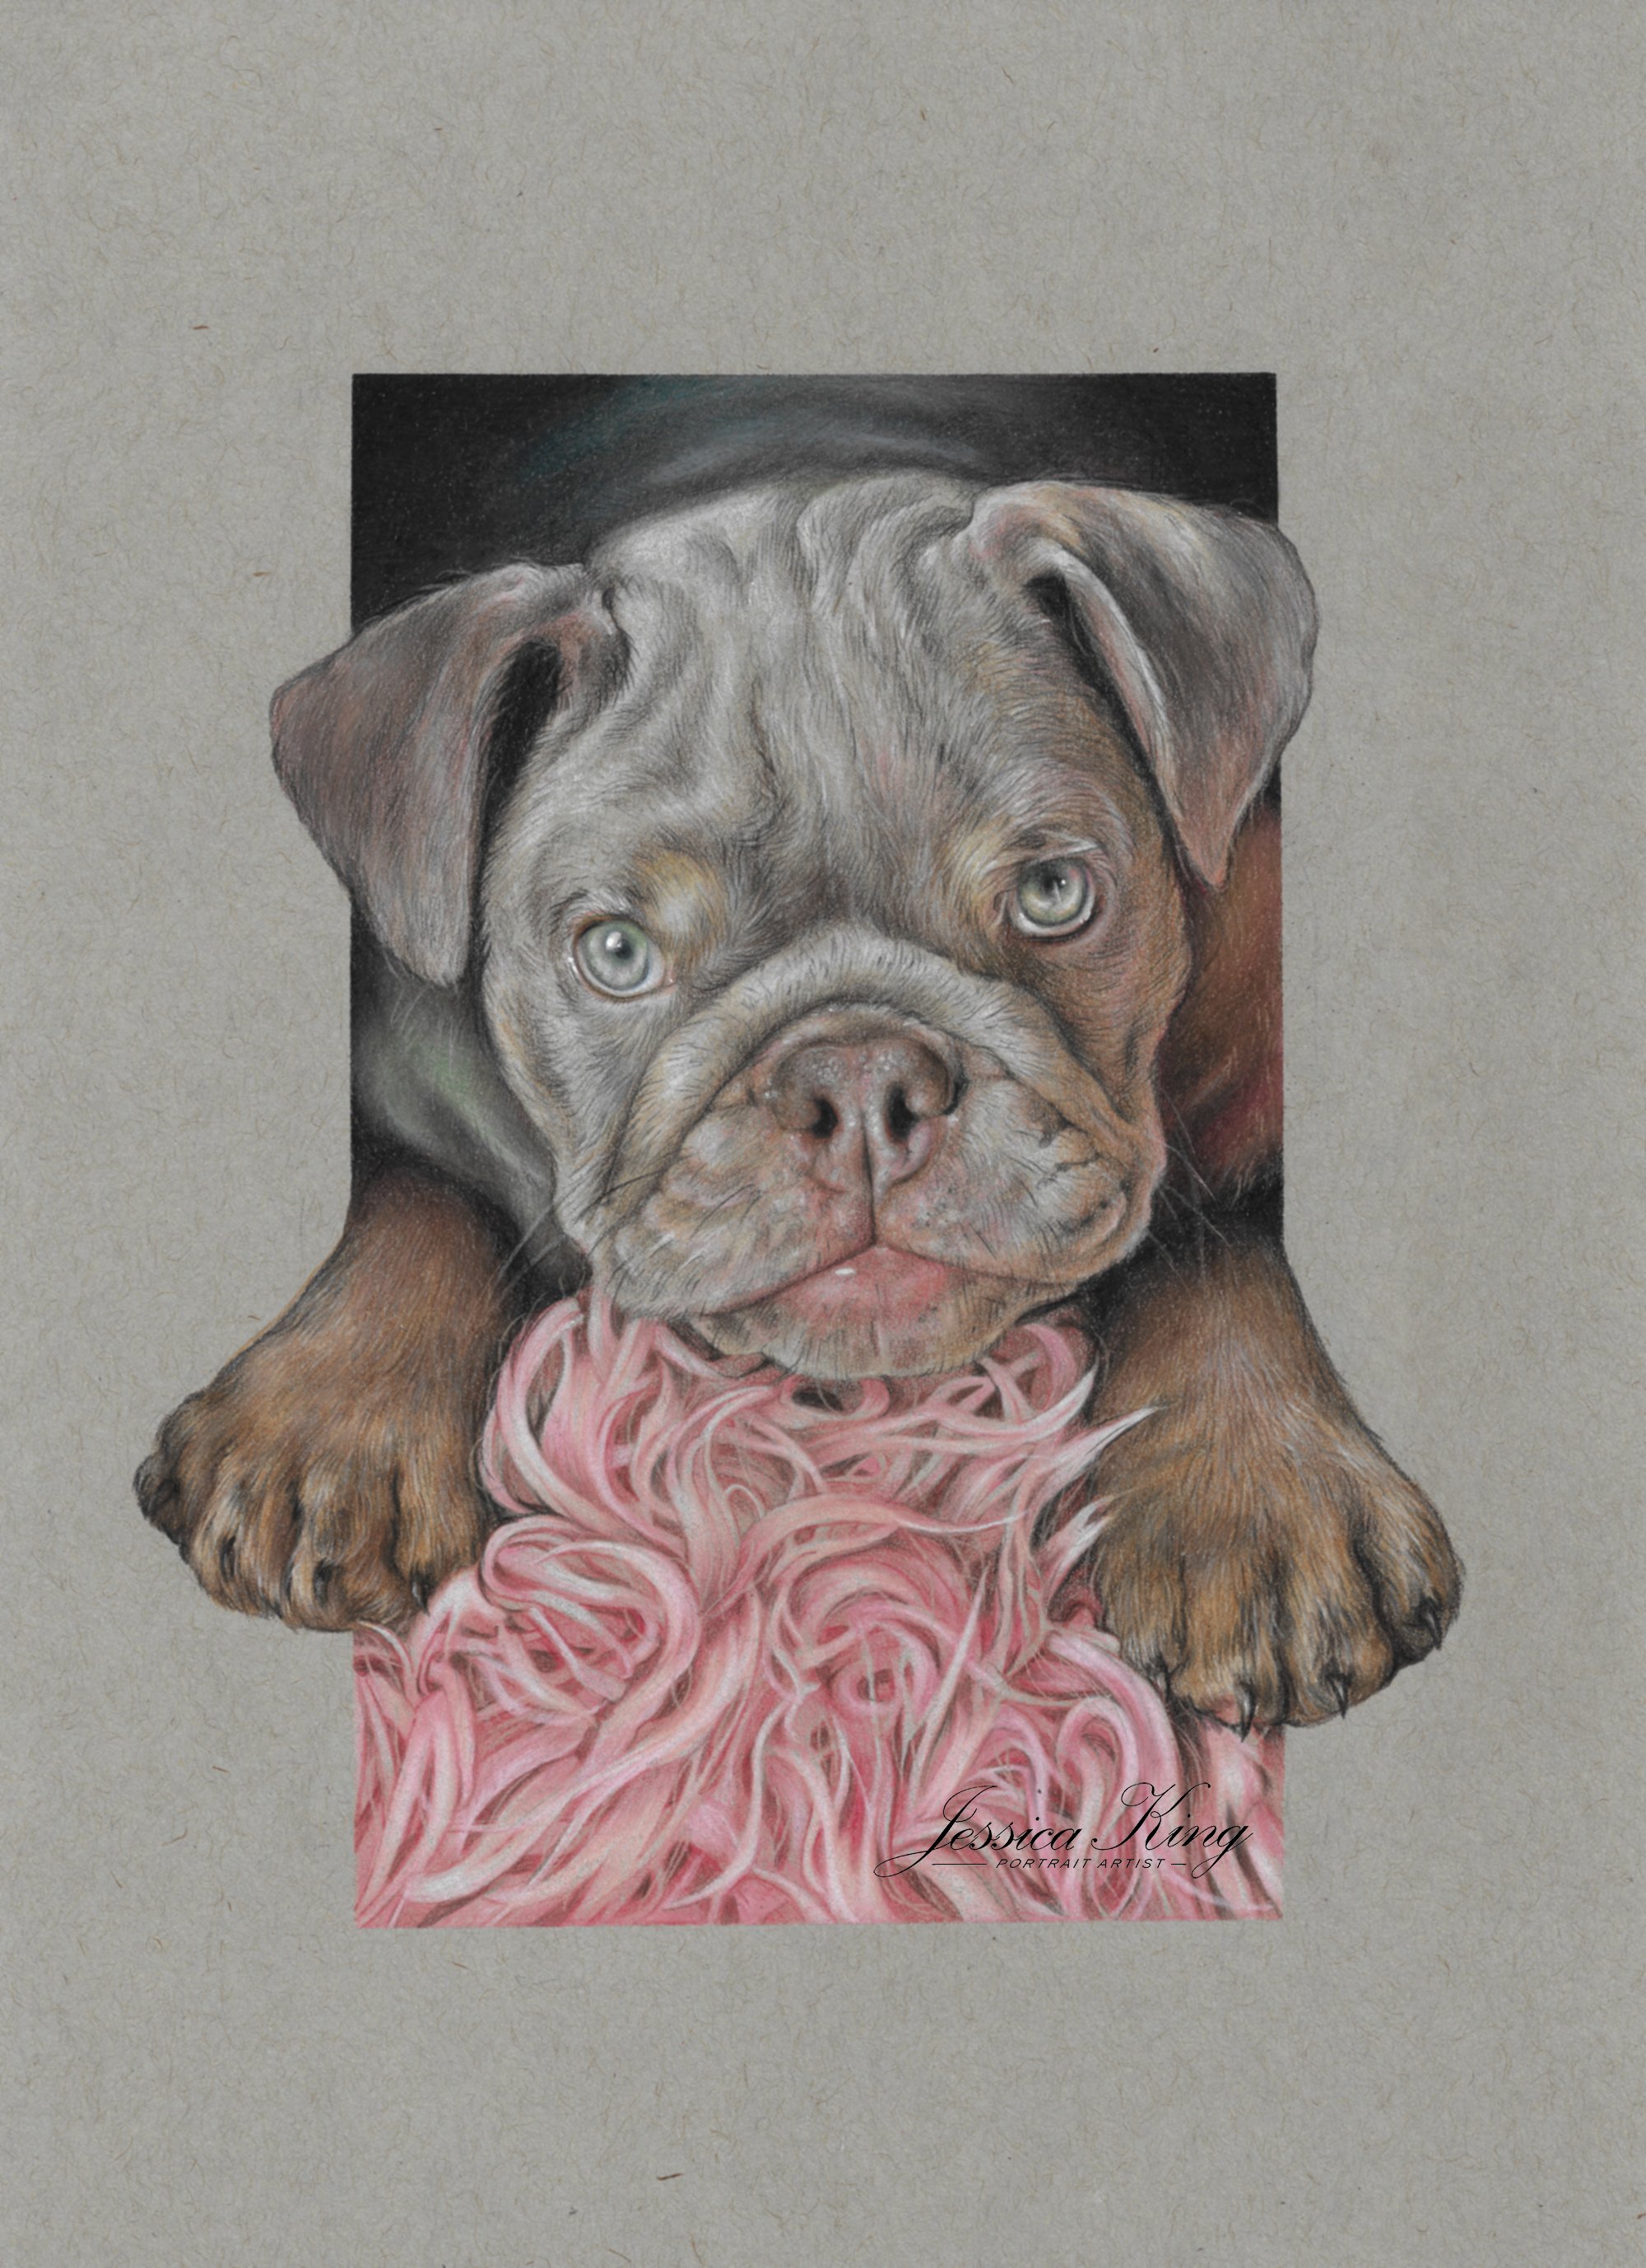 King_Jessica_Nelly_ColouredPencil_8x11inch.jpg